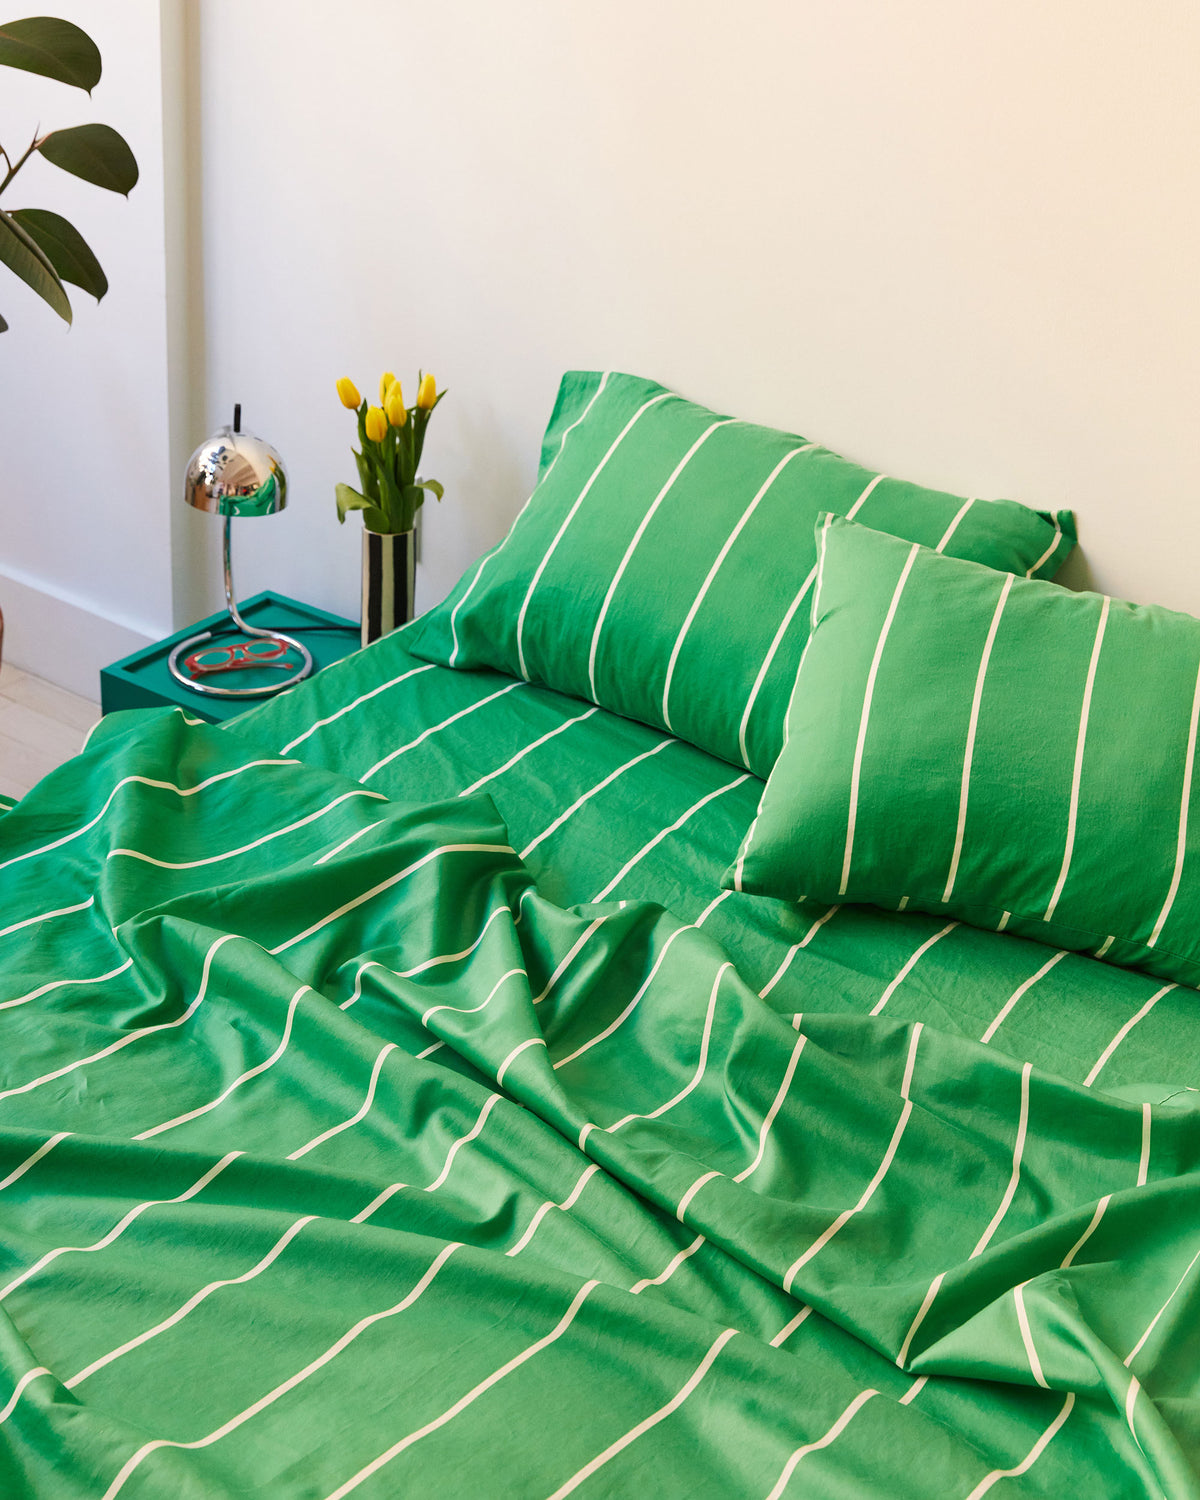 Dusen Dusen Lawn Stripe Sheets. Sheeting in green and white stripes. 100% cotton sateen, 300 thread count. Machine wash cold and tumble dry. Made in Portugal. Our cotton sateen is smooth and cool to the touch and features a slightly lustrous finish.